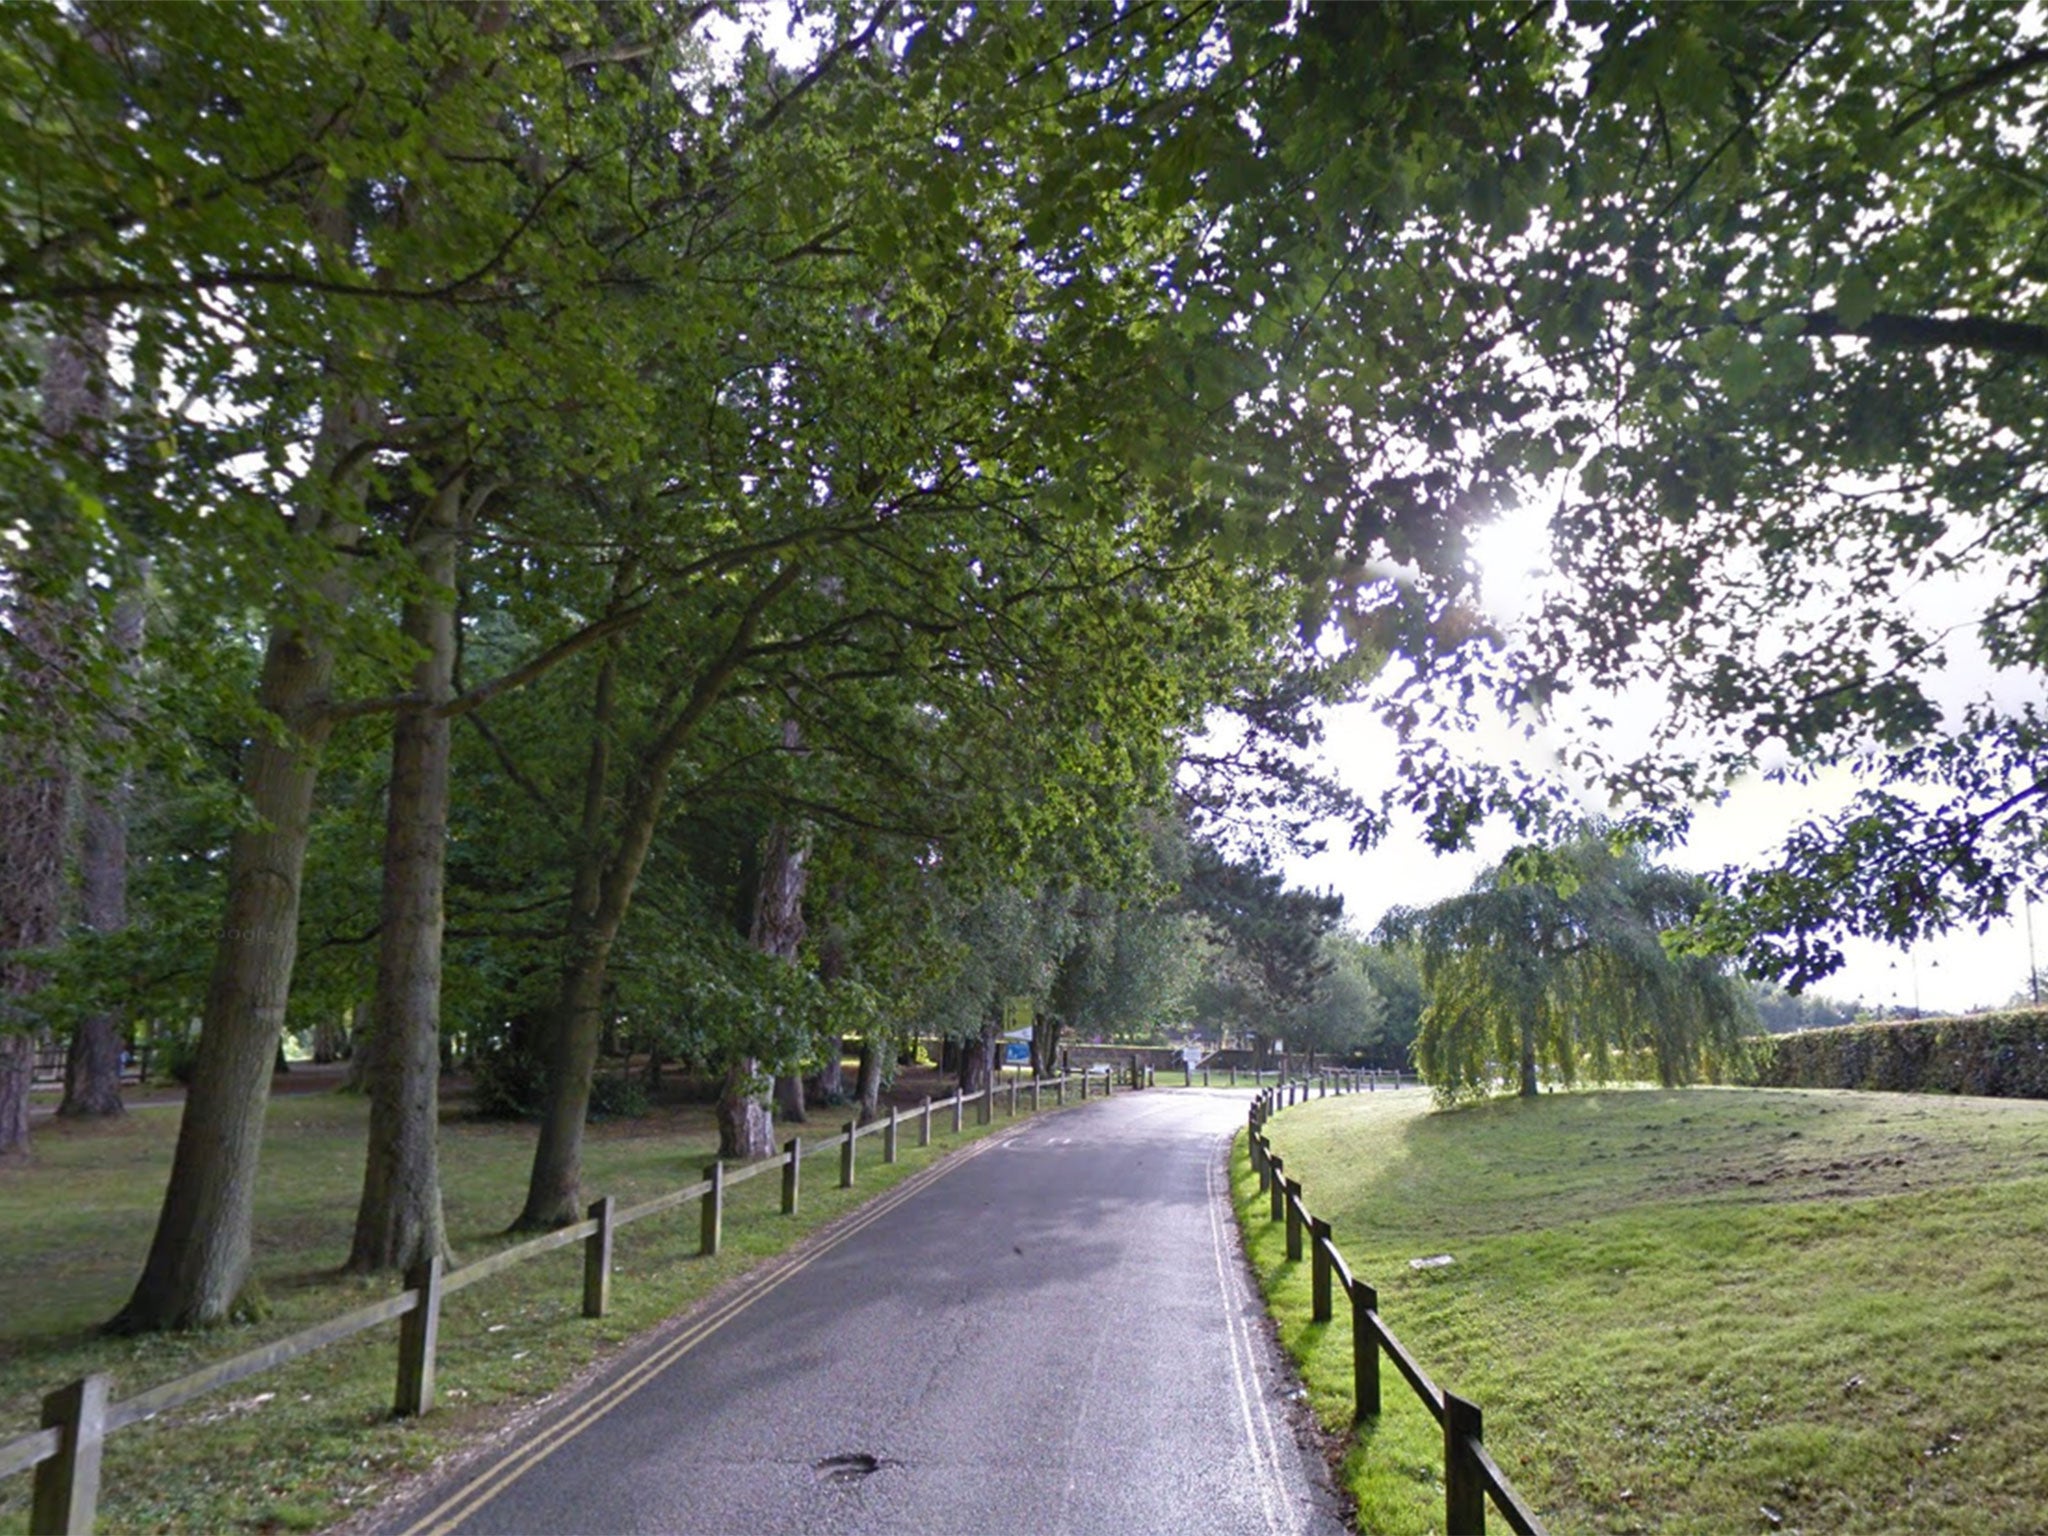 Tilgate park in Crawley where a school girl was attacked by a 35-year-old man